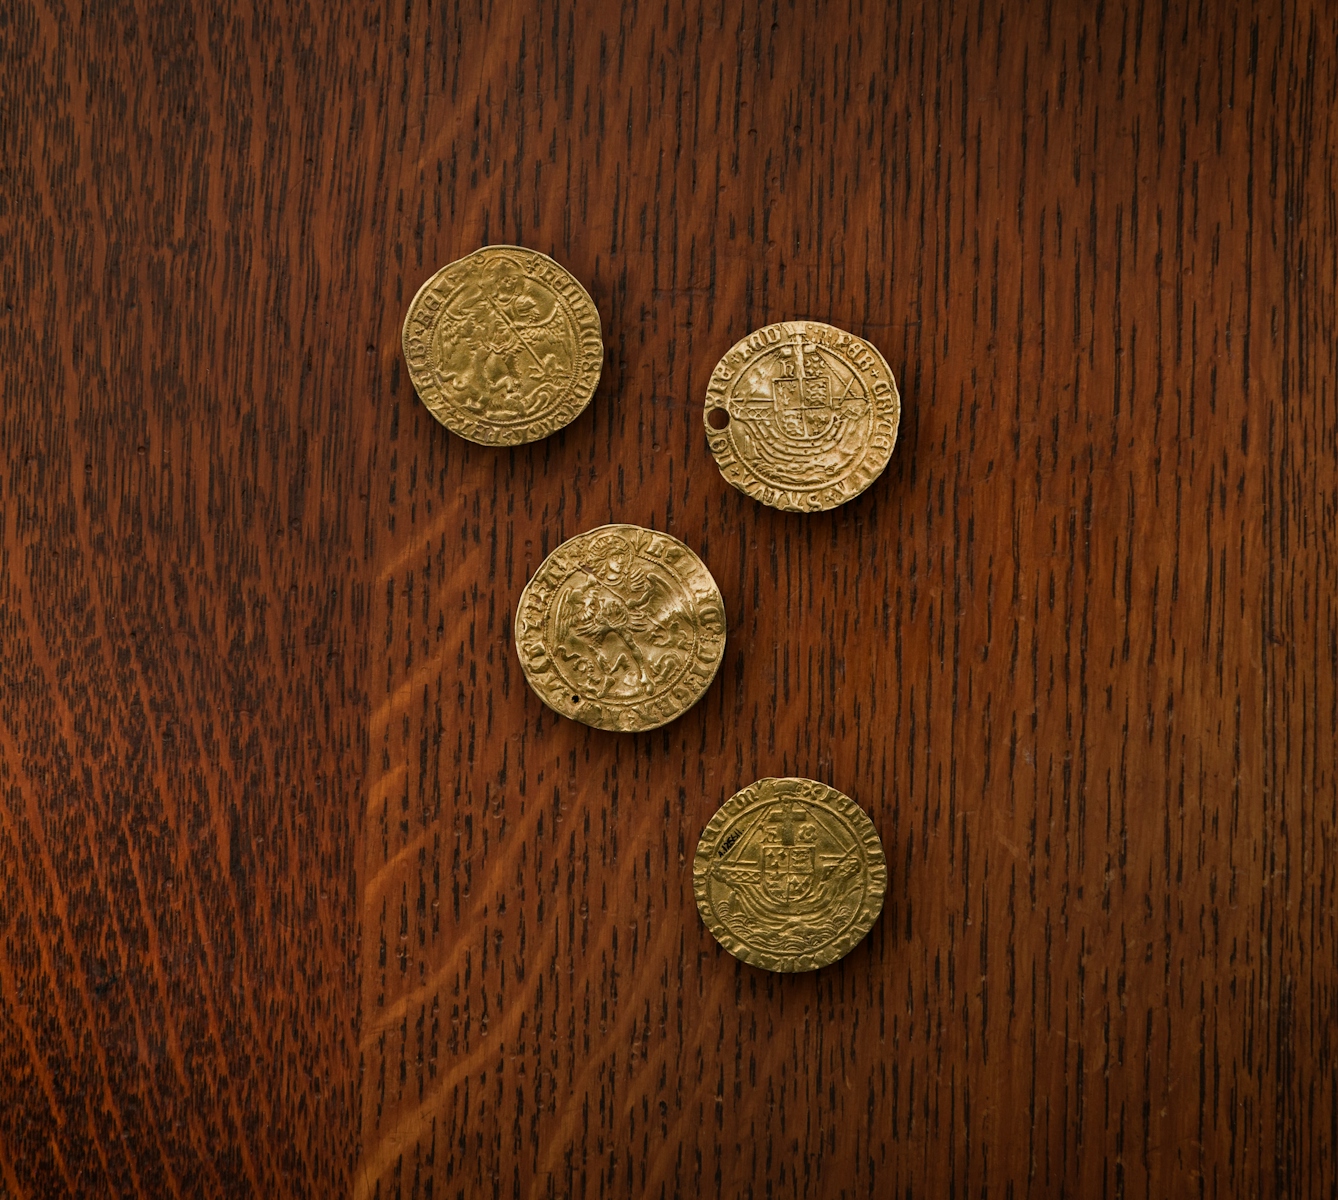 A photograph of four gold coin touch pieces, each coin has markings around its edge and across its face, one of the coins is punctured with a hole.